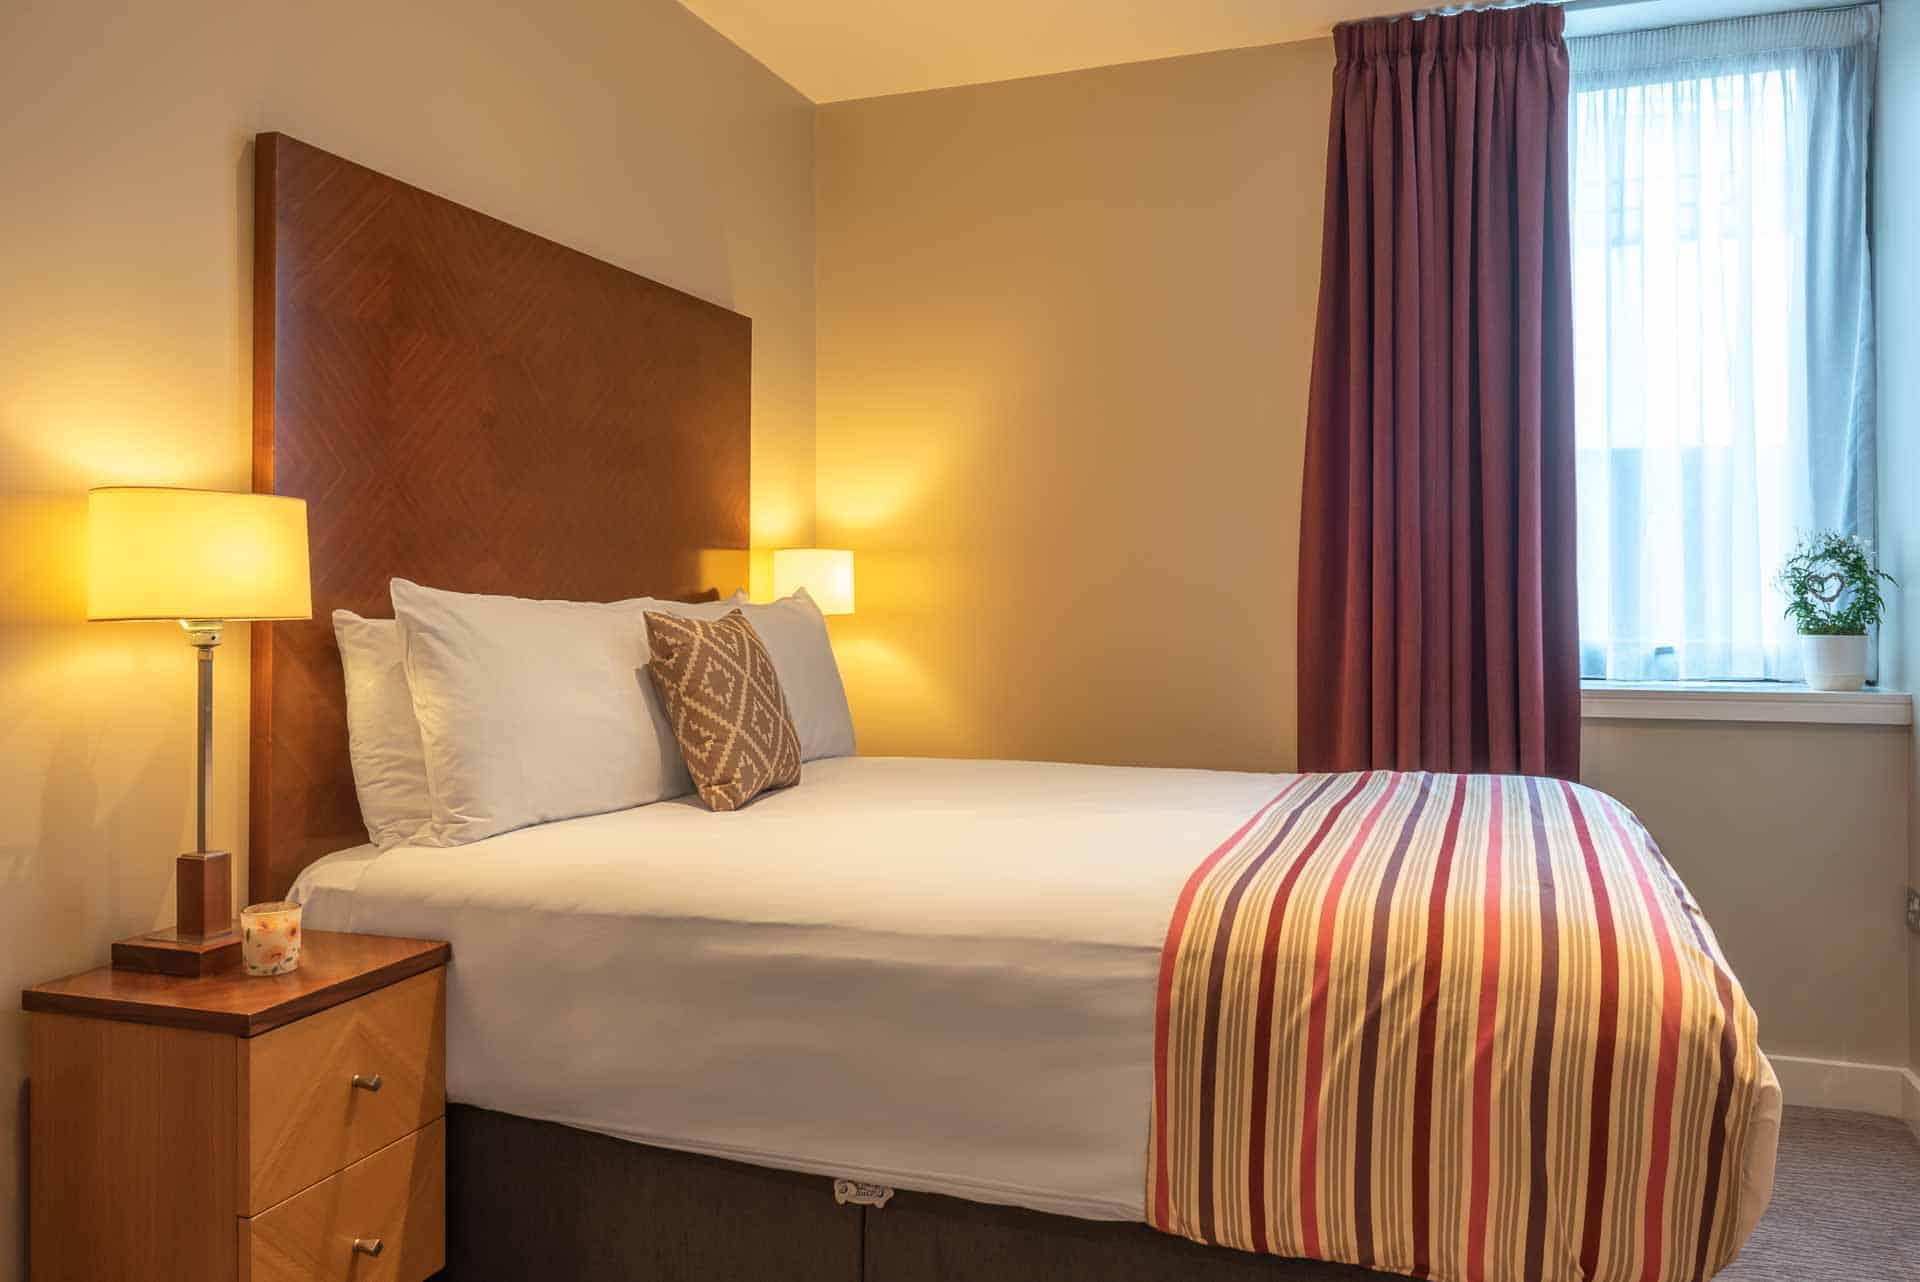 Gallery - Serviced Apartments Manchester - PREMIER SUITES Manchester